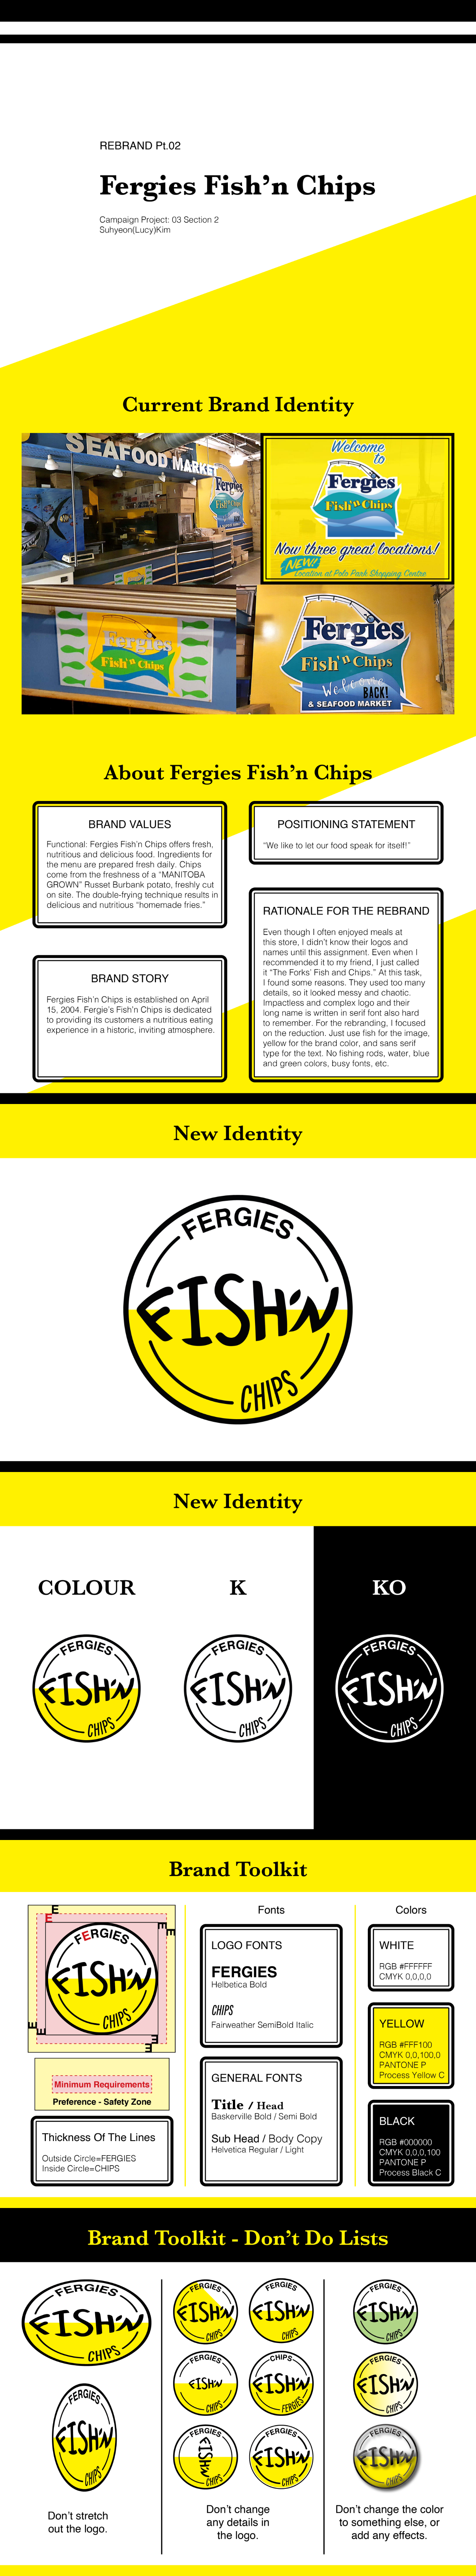 Fergies Fish'n Chips Project2